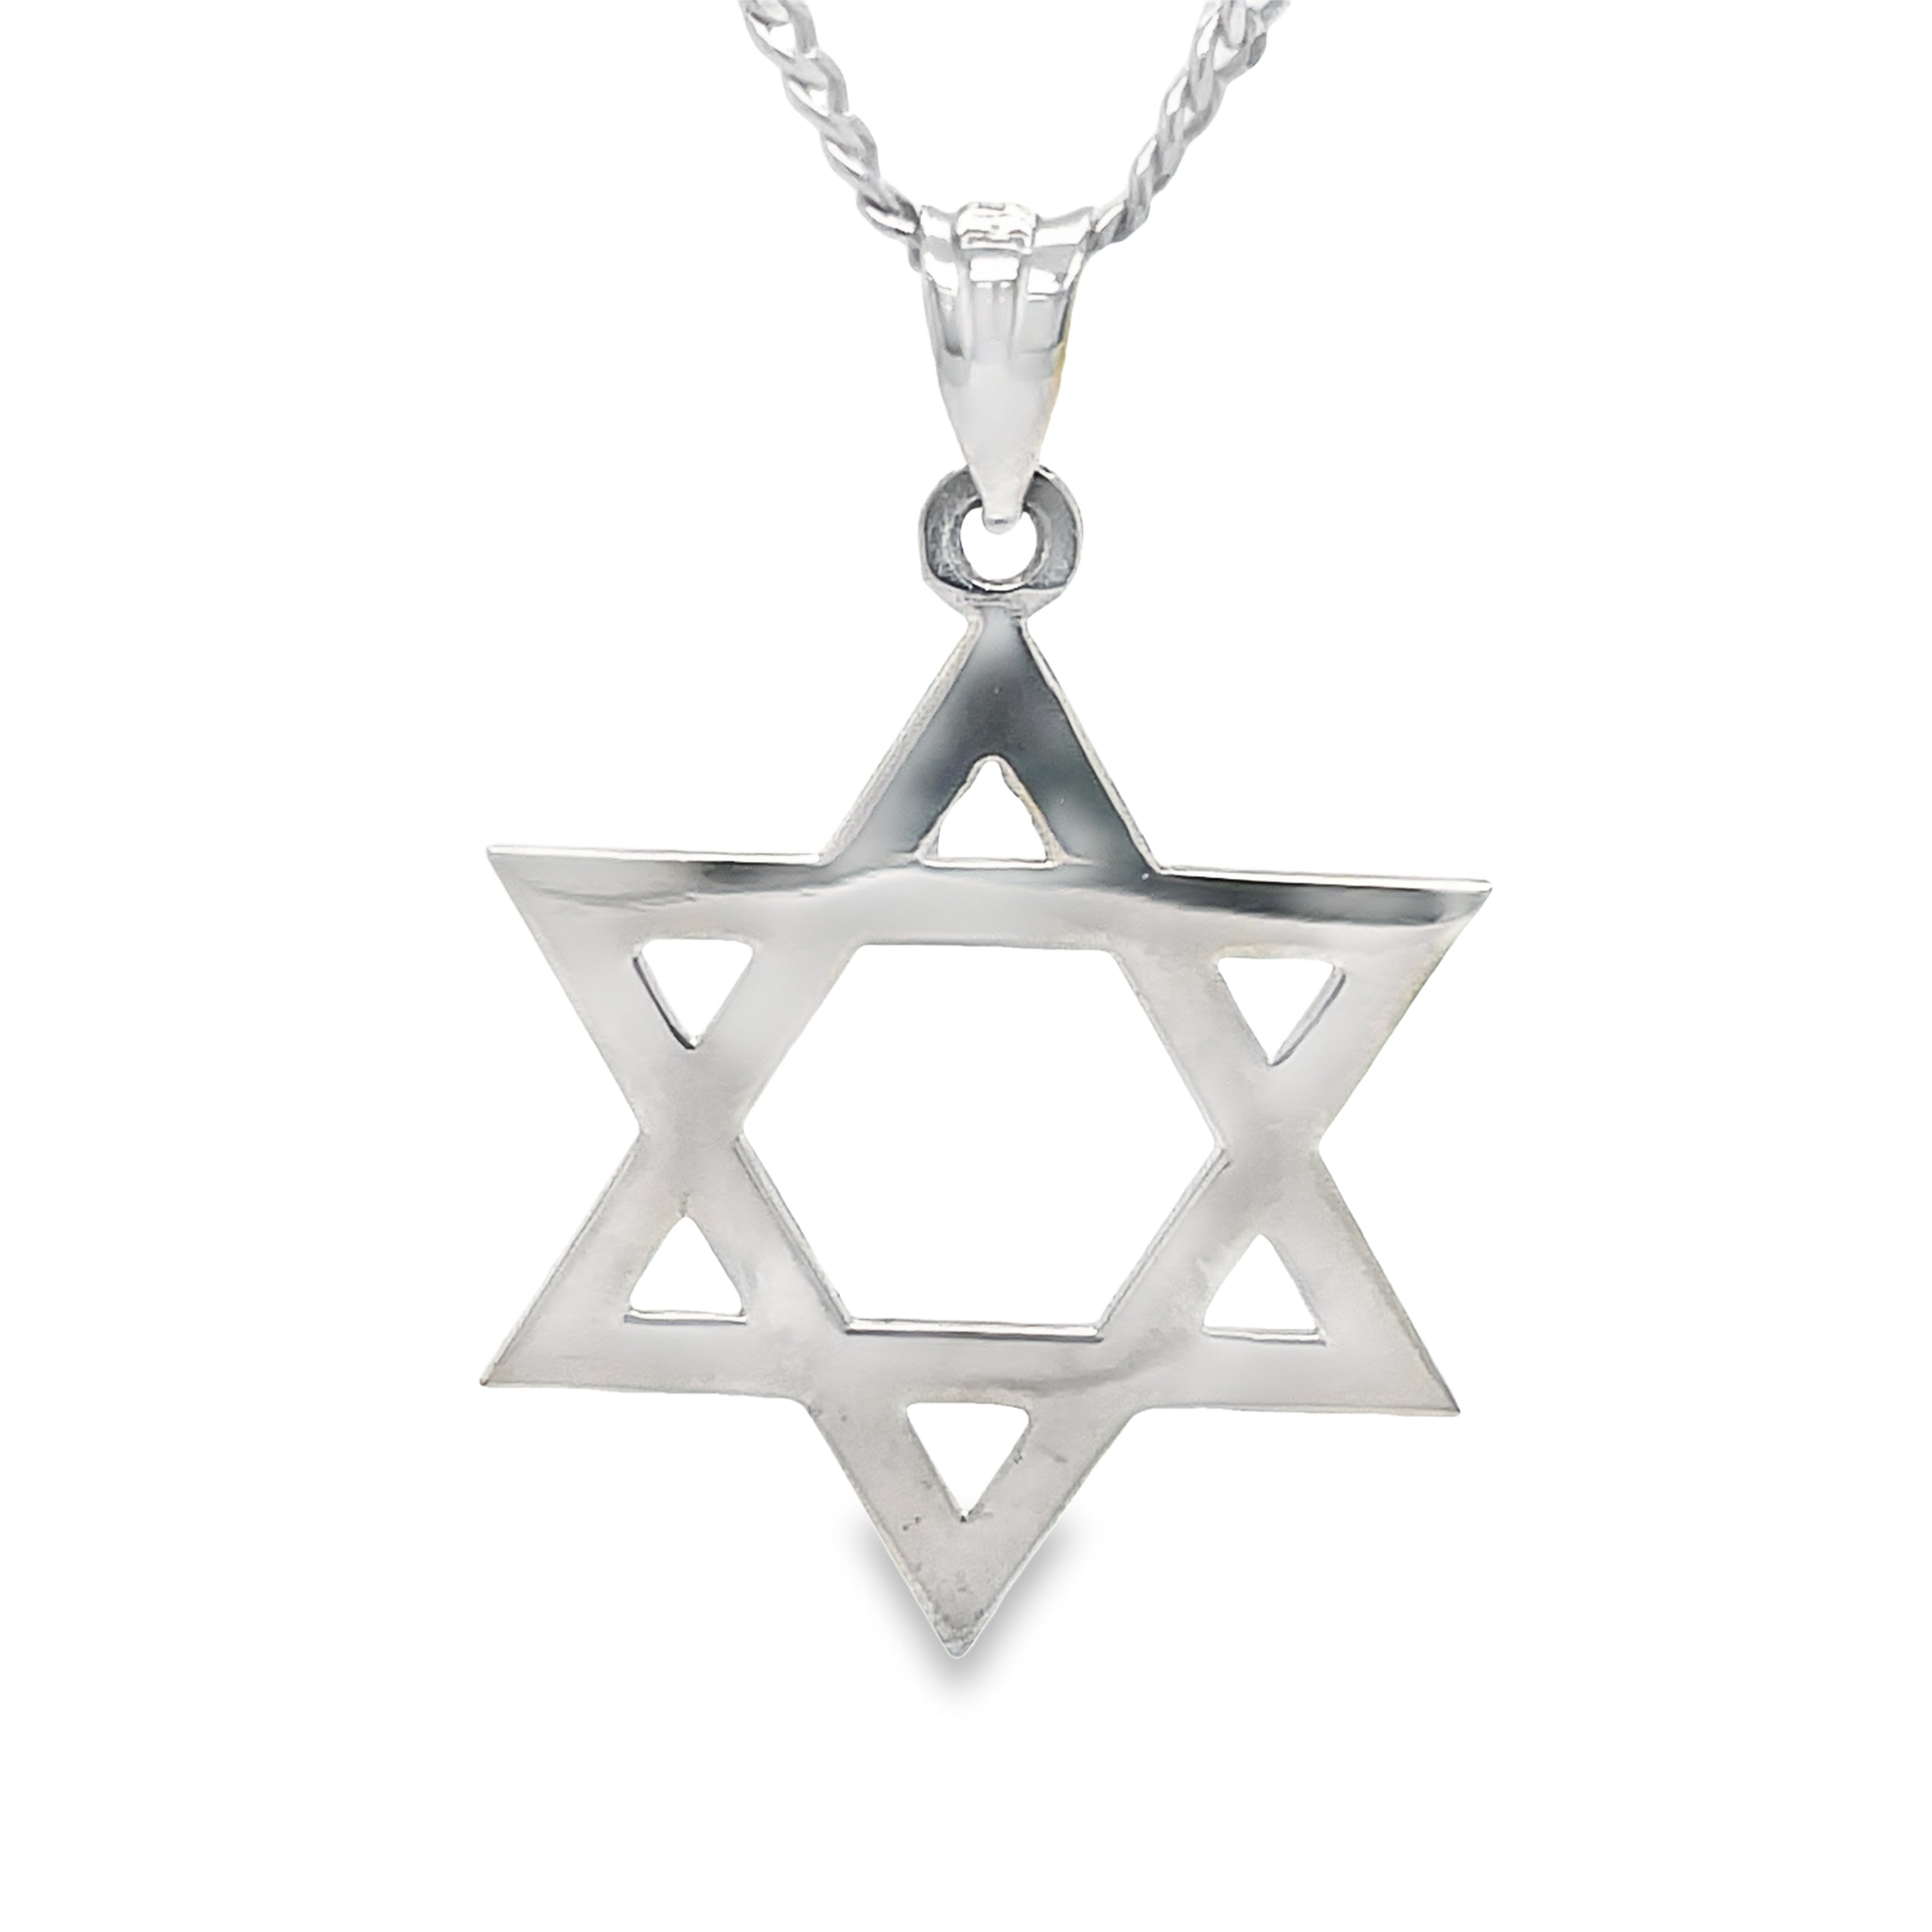 This 14K white Gold Star of David Pendant Necklace is a timeless symbol of faith and beauty. Charm measures 28.00 mm and is made with 14K white gold. Create a special look when you add the optional 18" long chain ($299) for a one-of-a-kind necklace. Feel inspired and emboldened with this stunning piece!